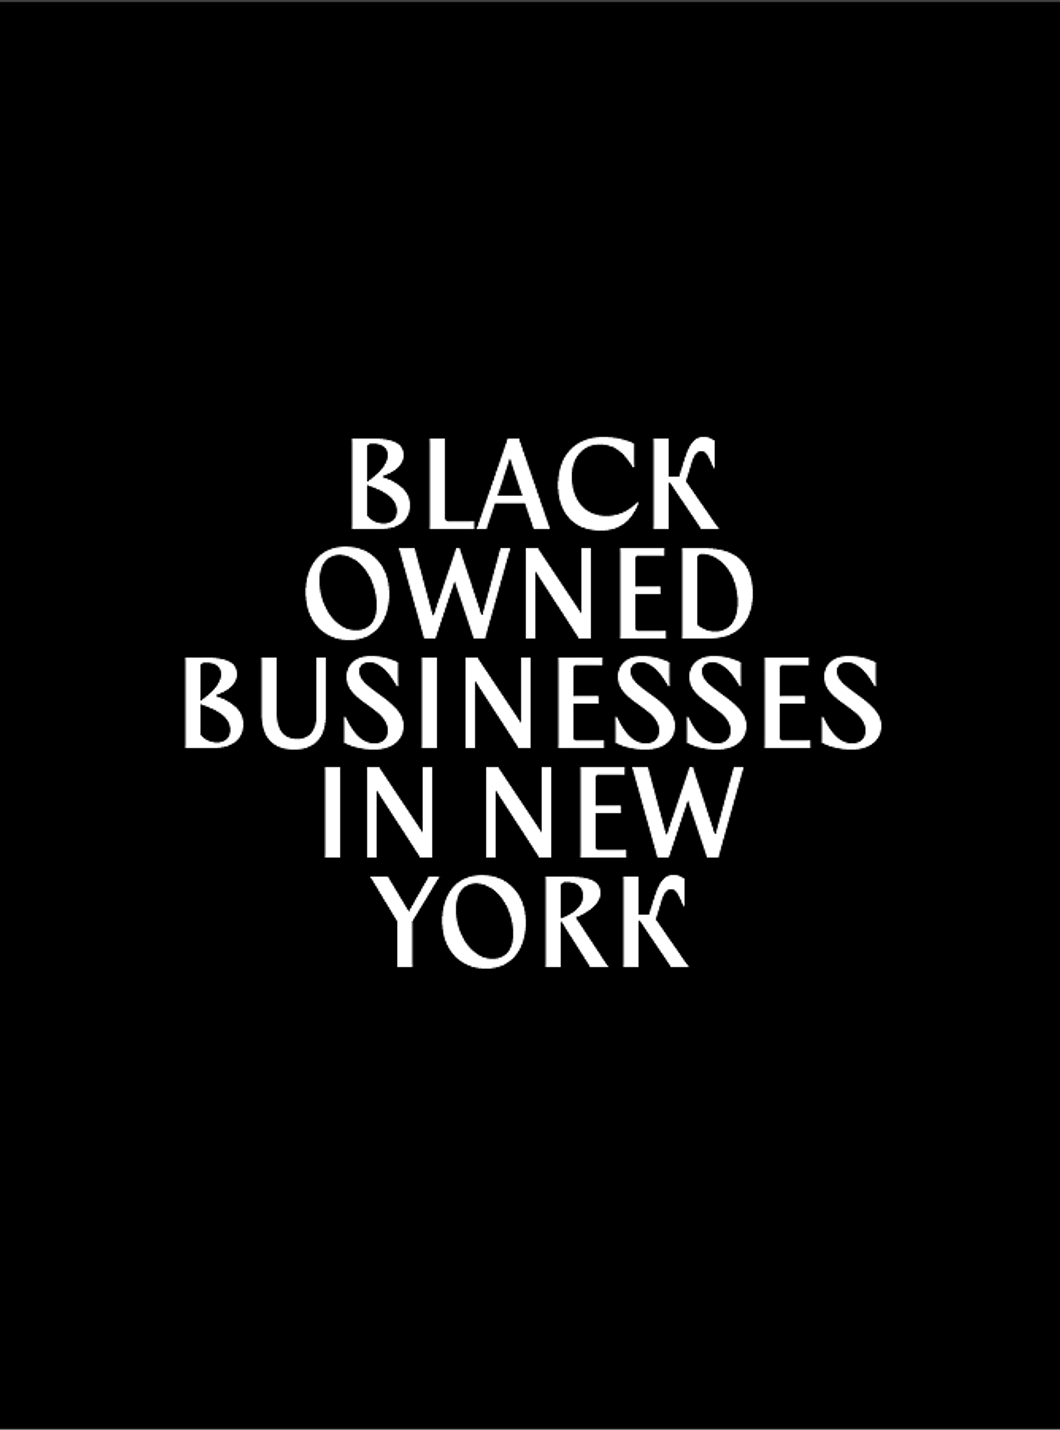 Black-Owned Businesses in New York